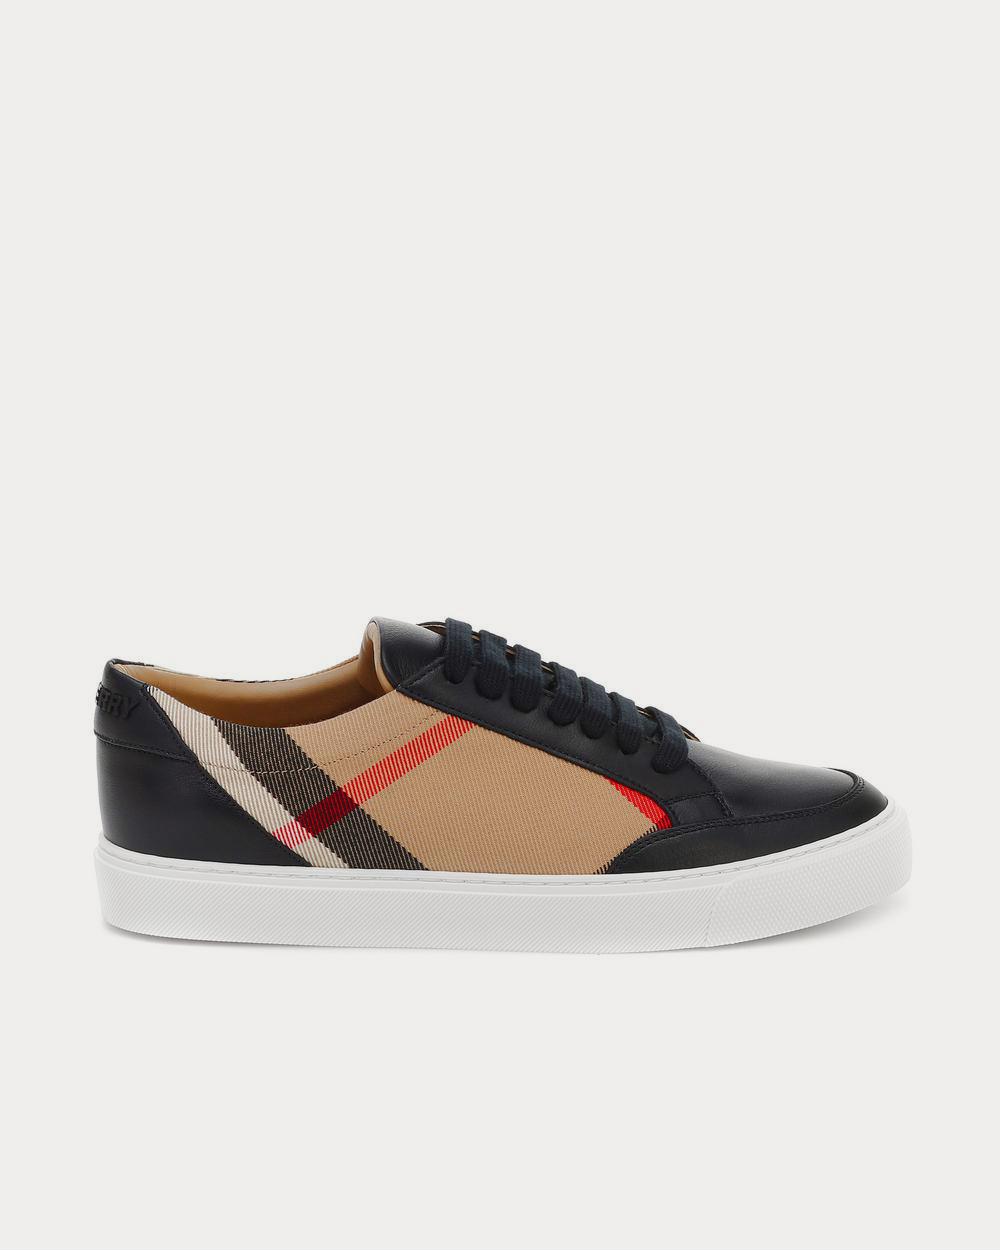 Salmond leather and cotton Black Low Top Sneakers - Peace